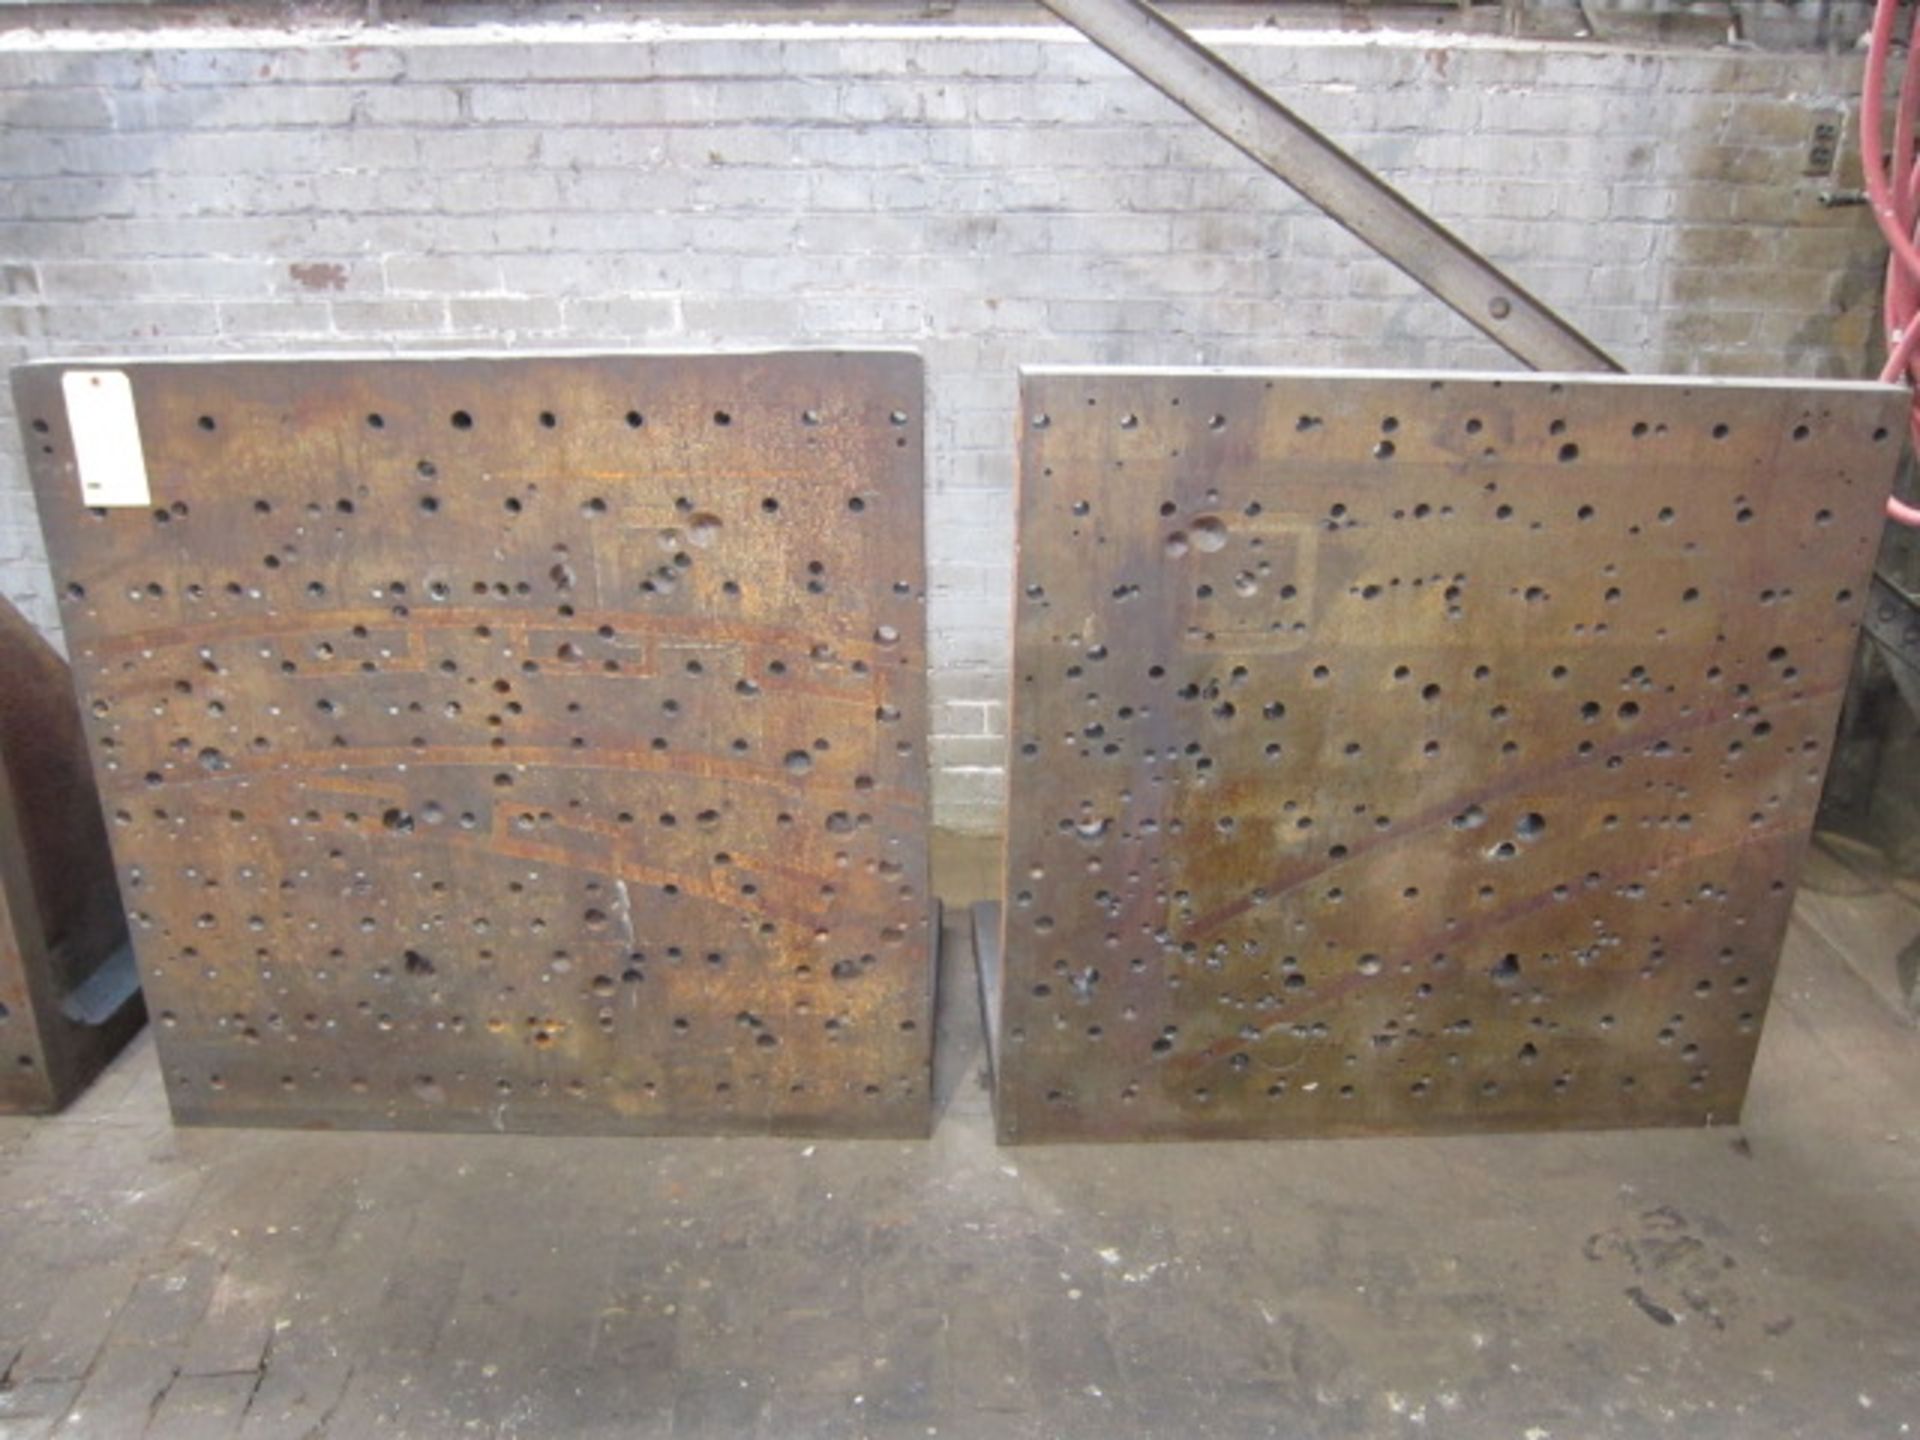 LOT OF DRILLED & TAPPED CAST IRON ANGLE PLATES, 42" x 42" (matched pair)